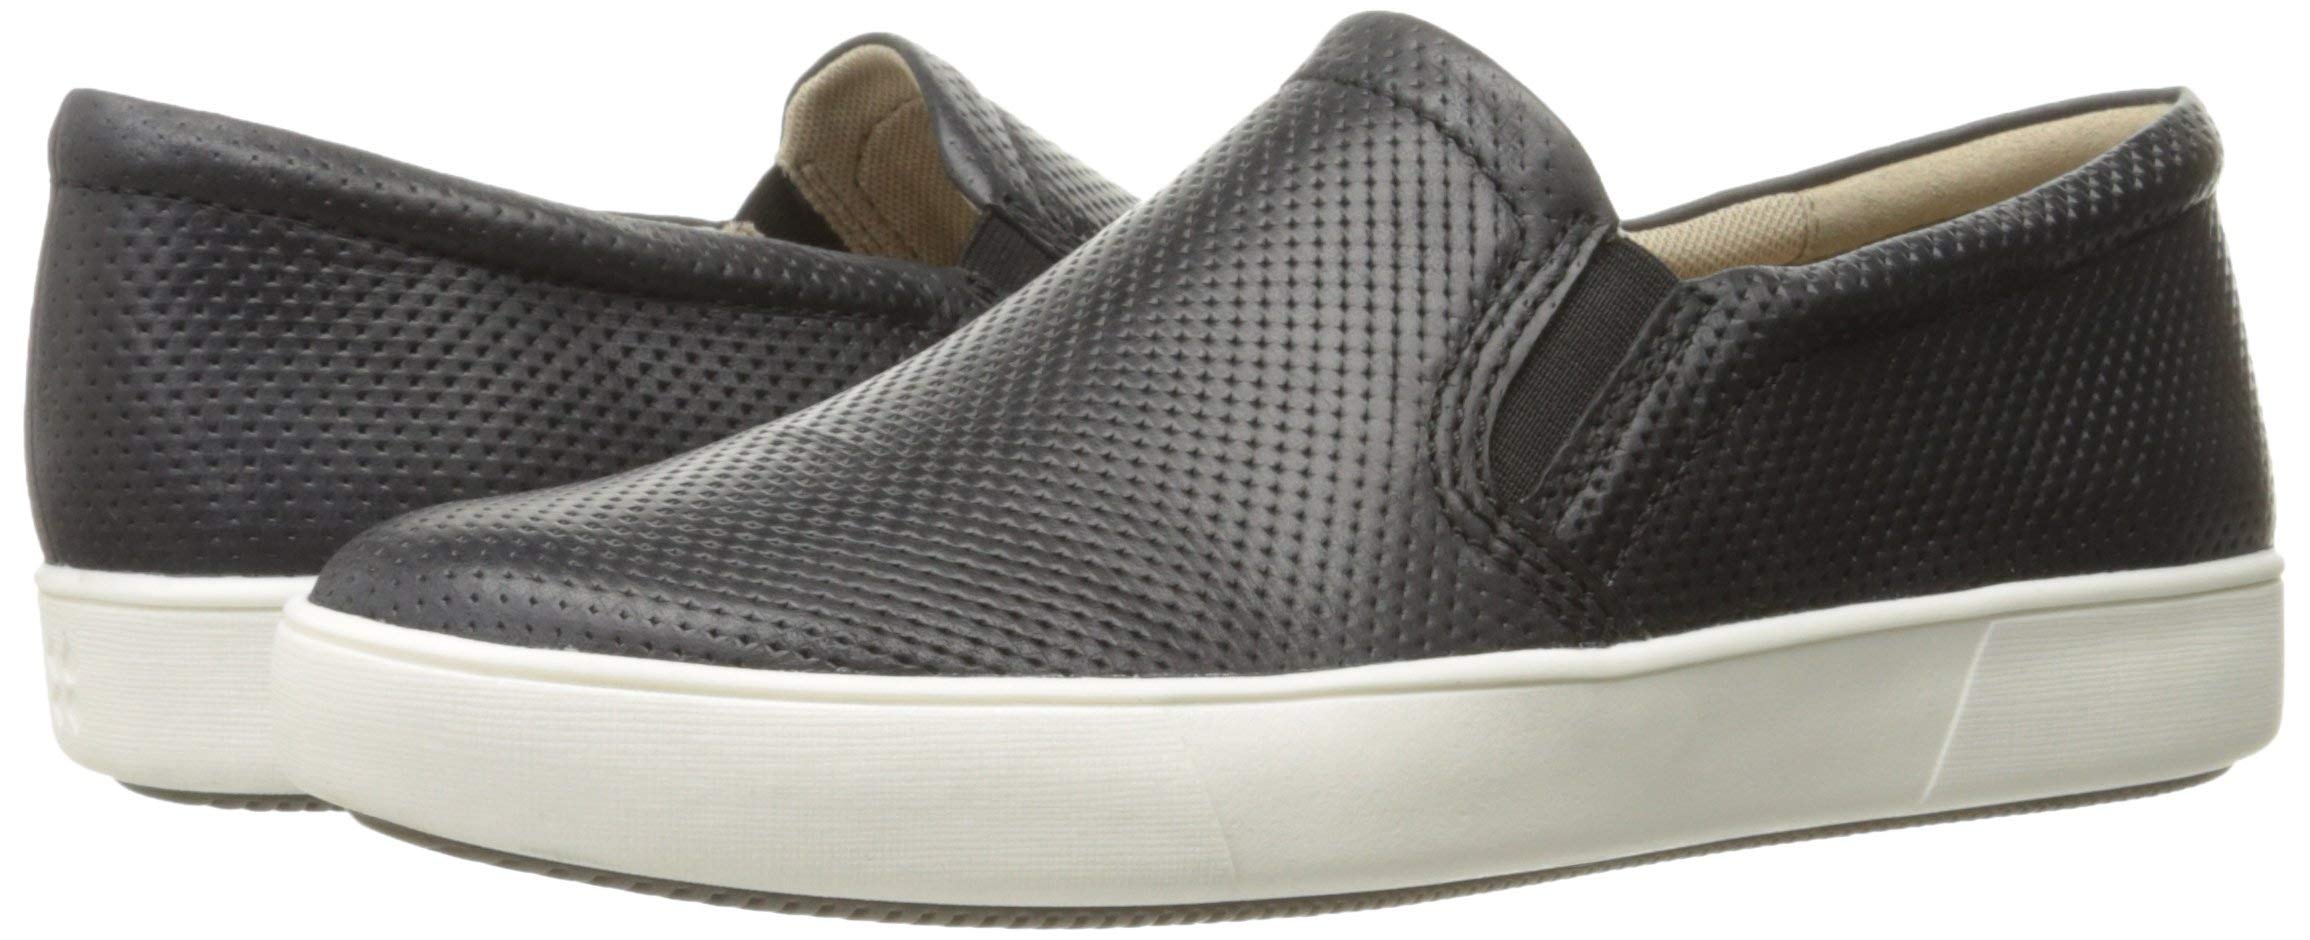 Naturalizer Womens Marianne Comfortable Fashion Casual Slip On Sneaker